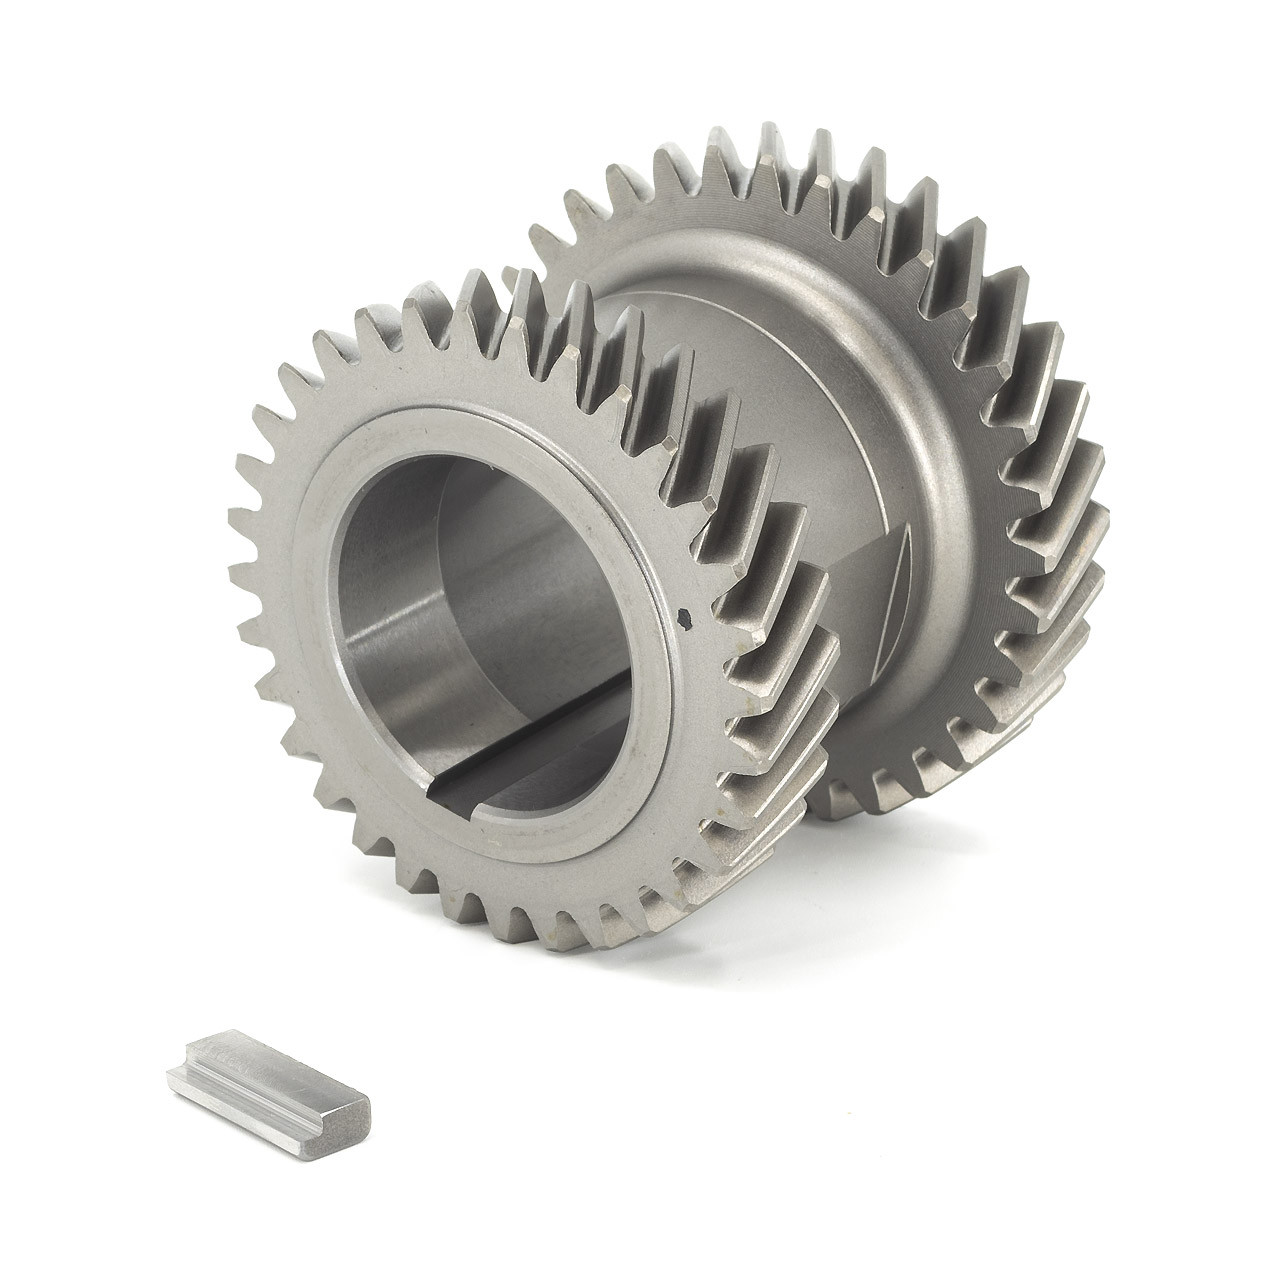 The drive-driven bevel gear assembly installed in the accessory gear box.